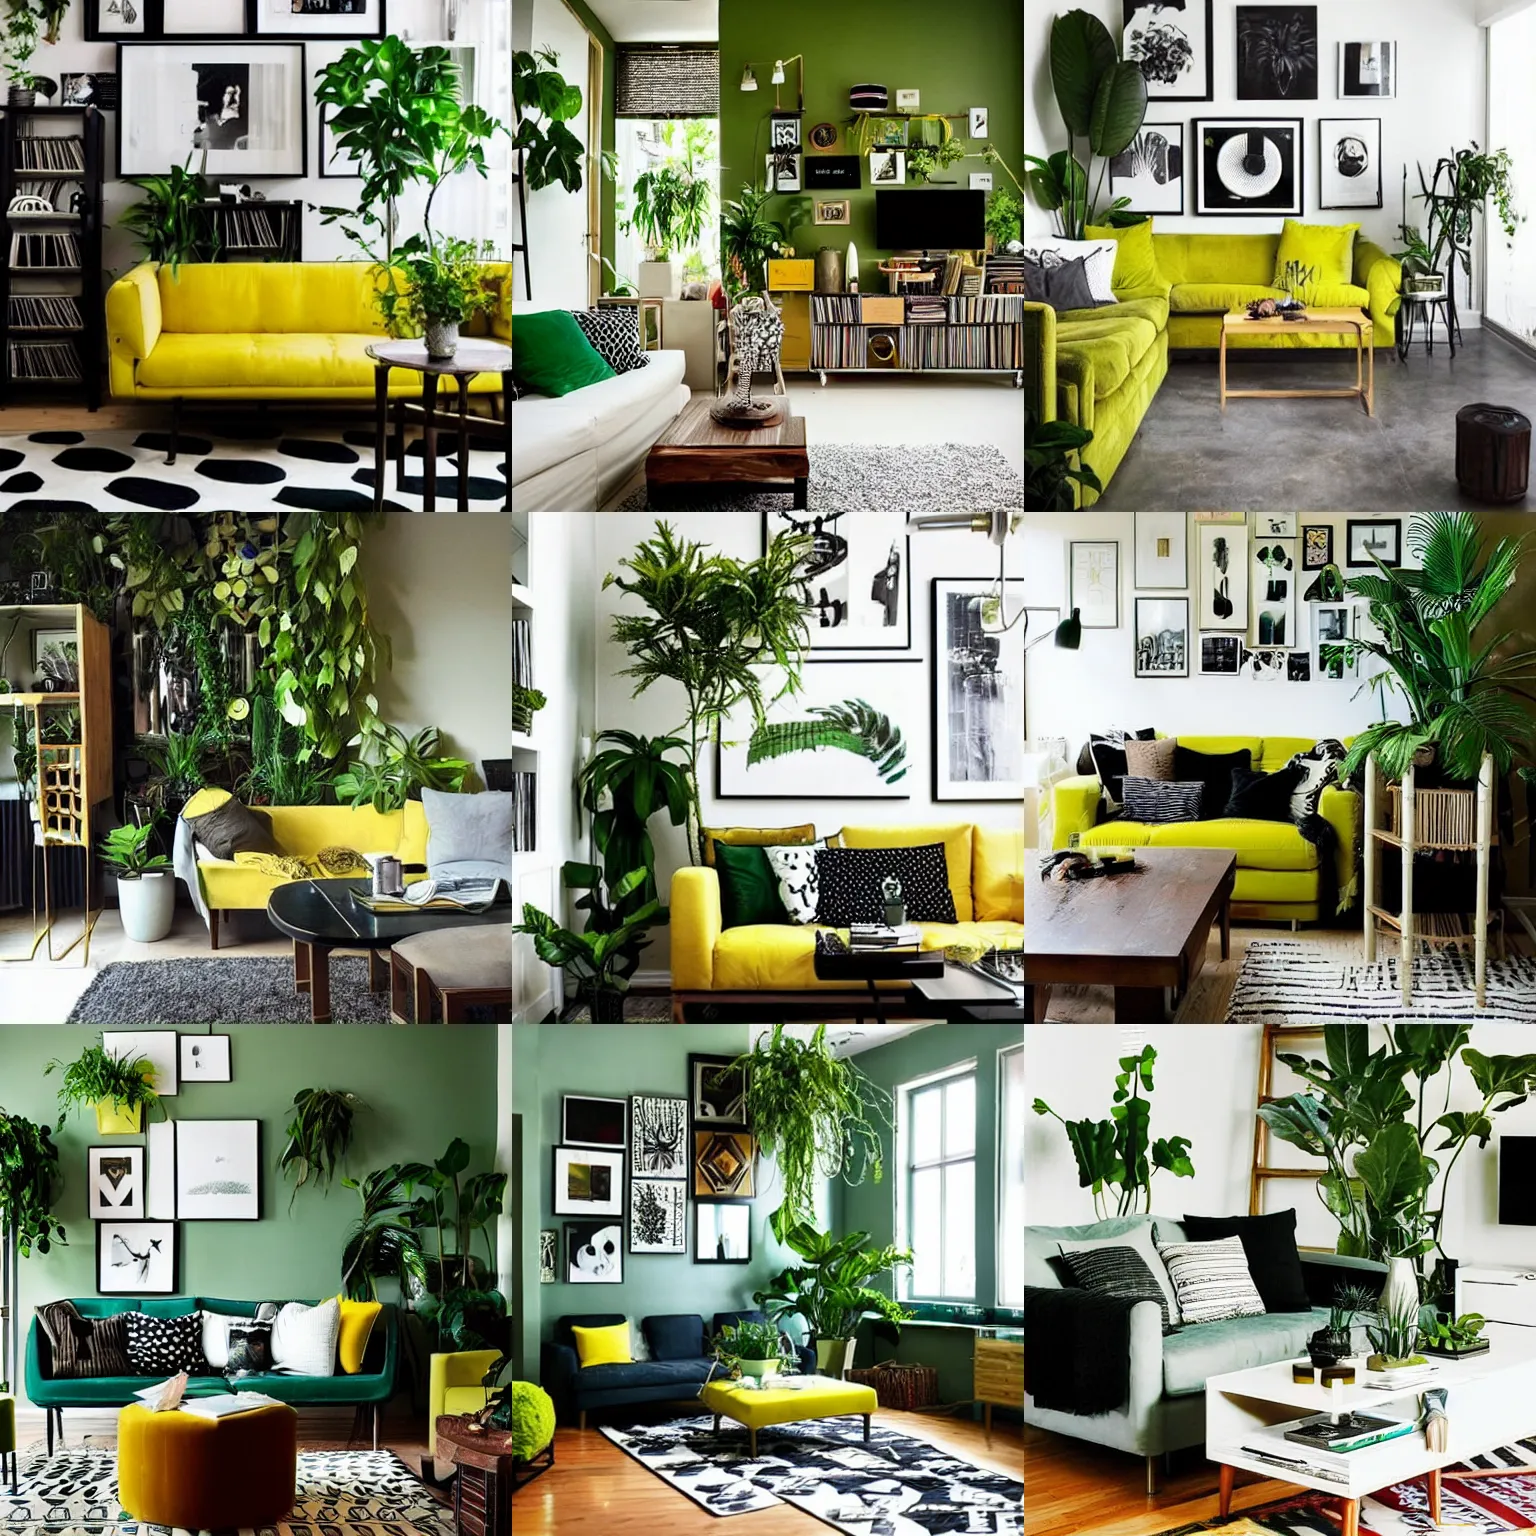 Prompt: living room interior design with style of japandi, ikea, warm wood, urban jungle plants, dark tile floor, art wall, music instruments, music records, pale green and hints of light warm yellow